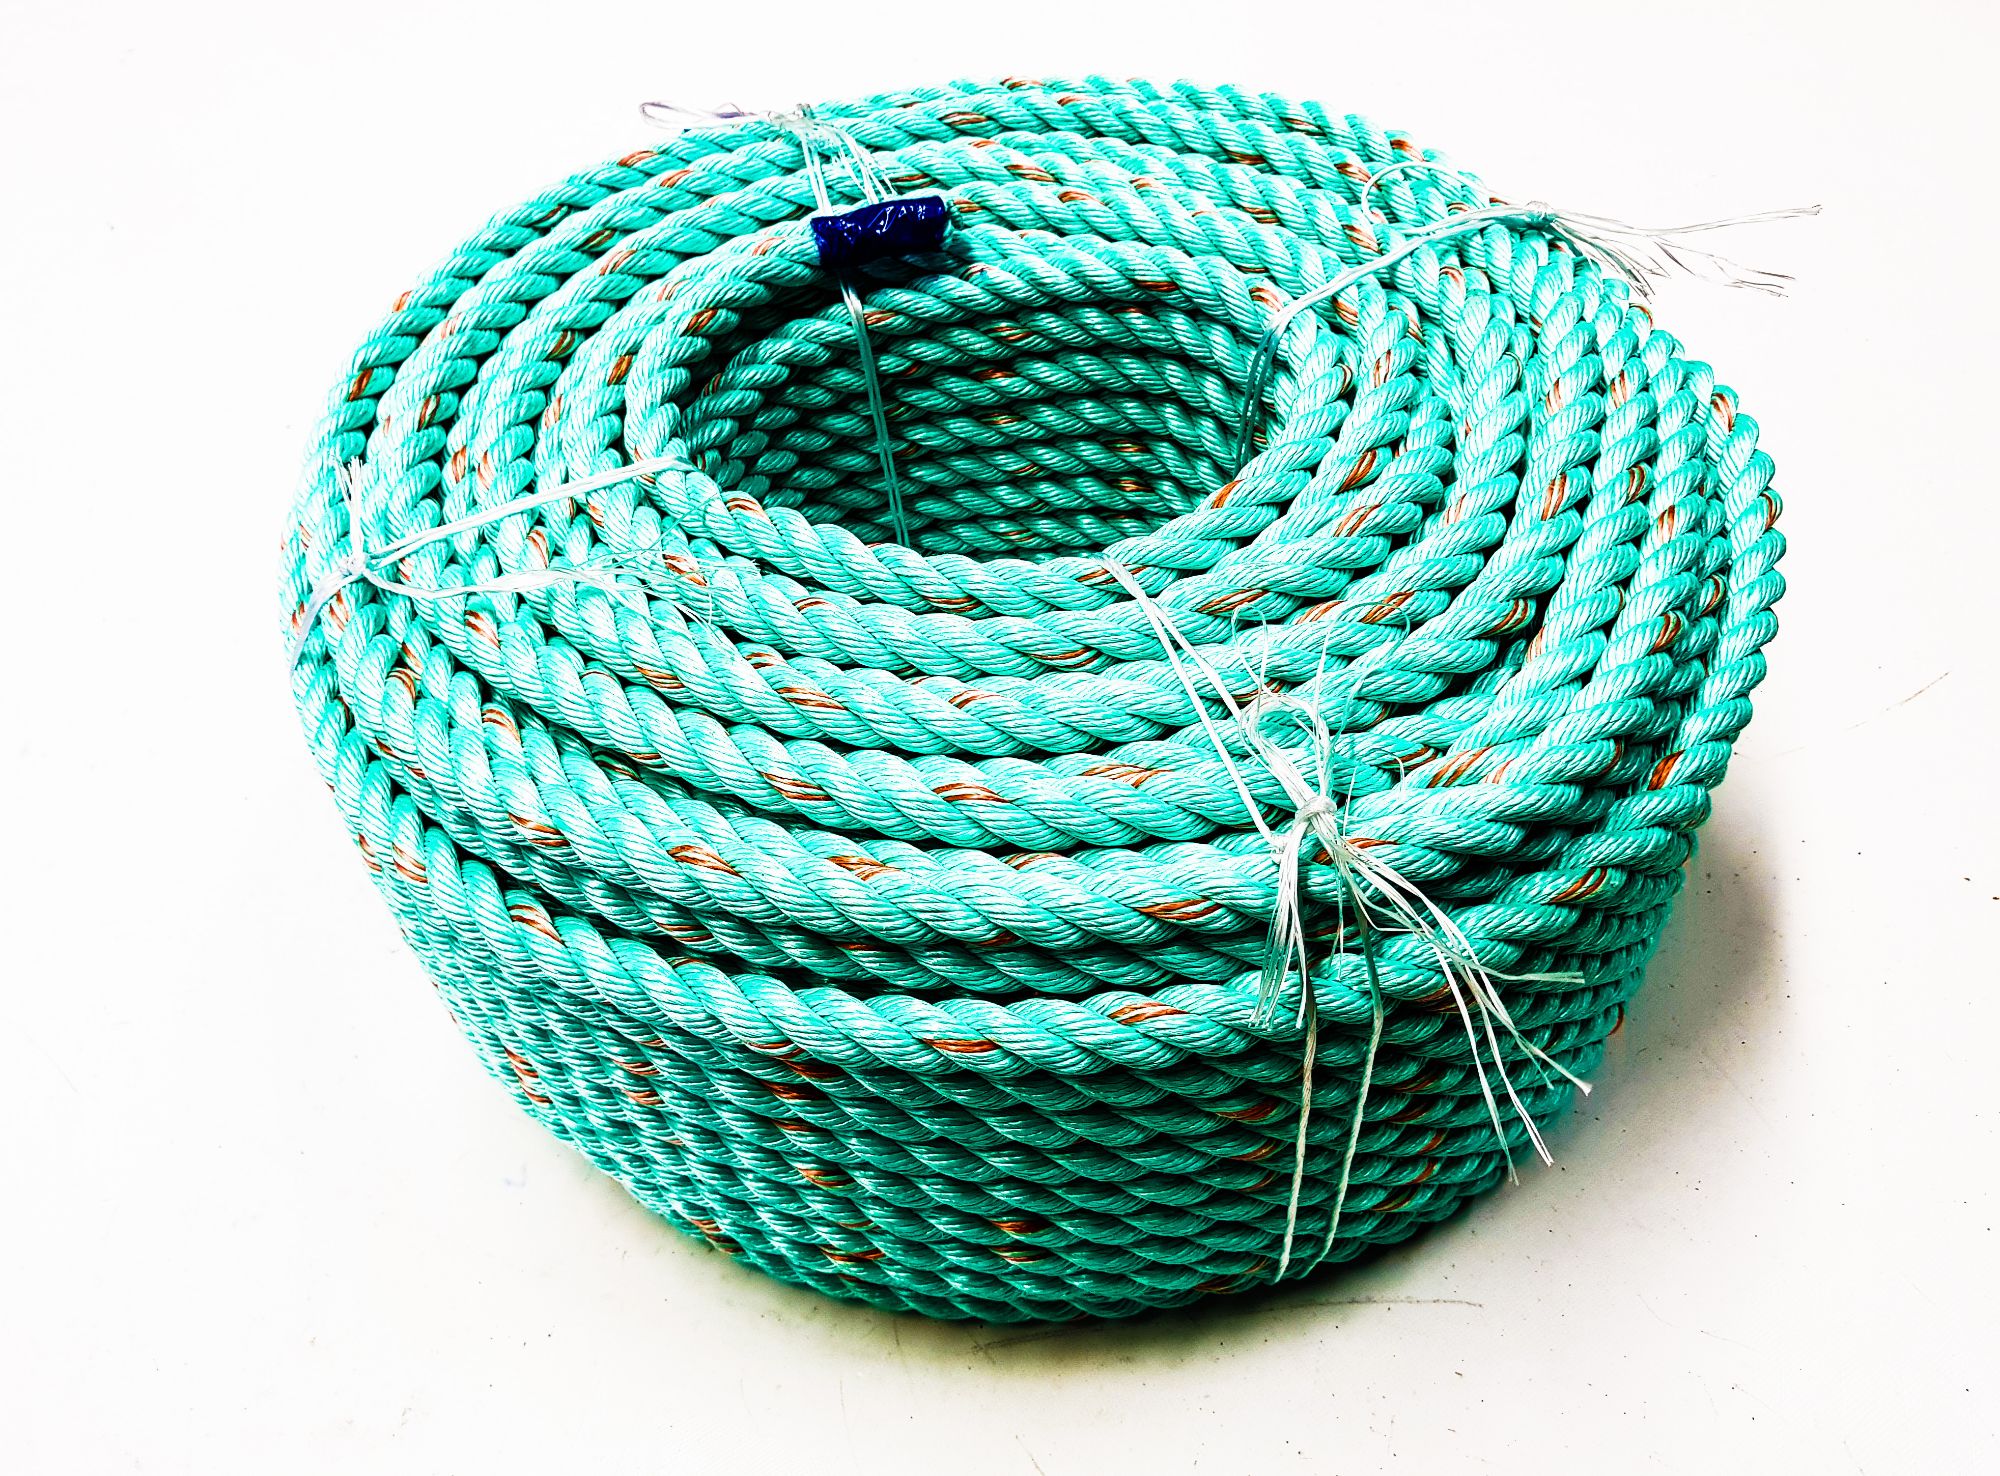 Anchor Warp Rope For Sale in Perth, Western Australia